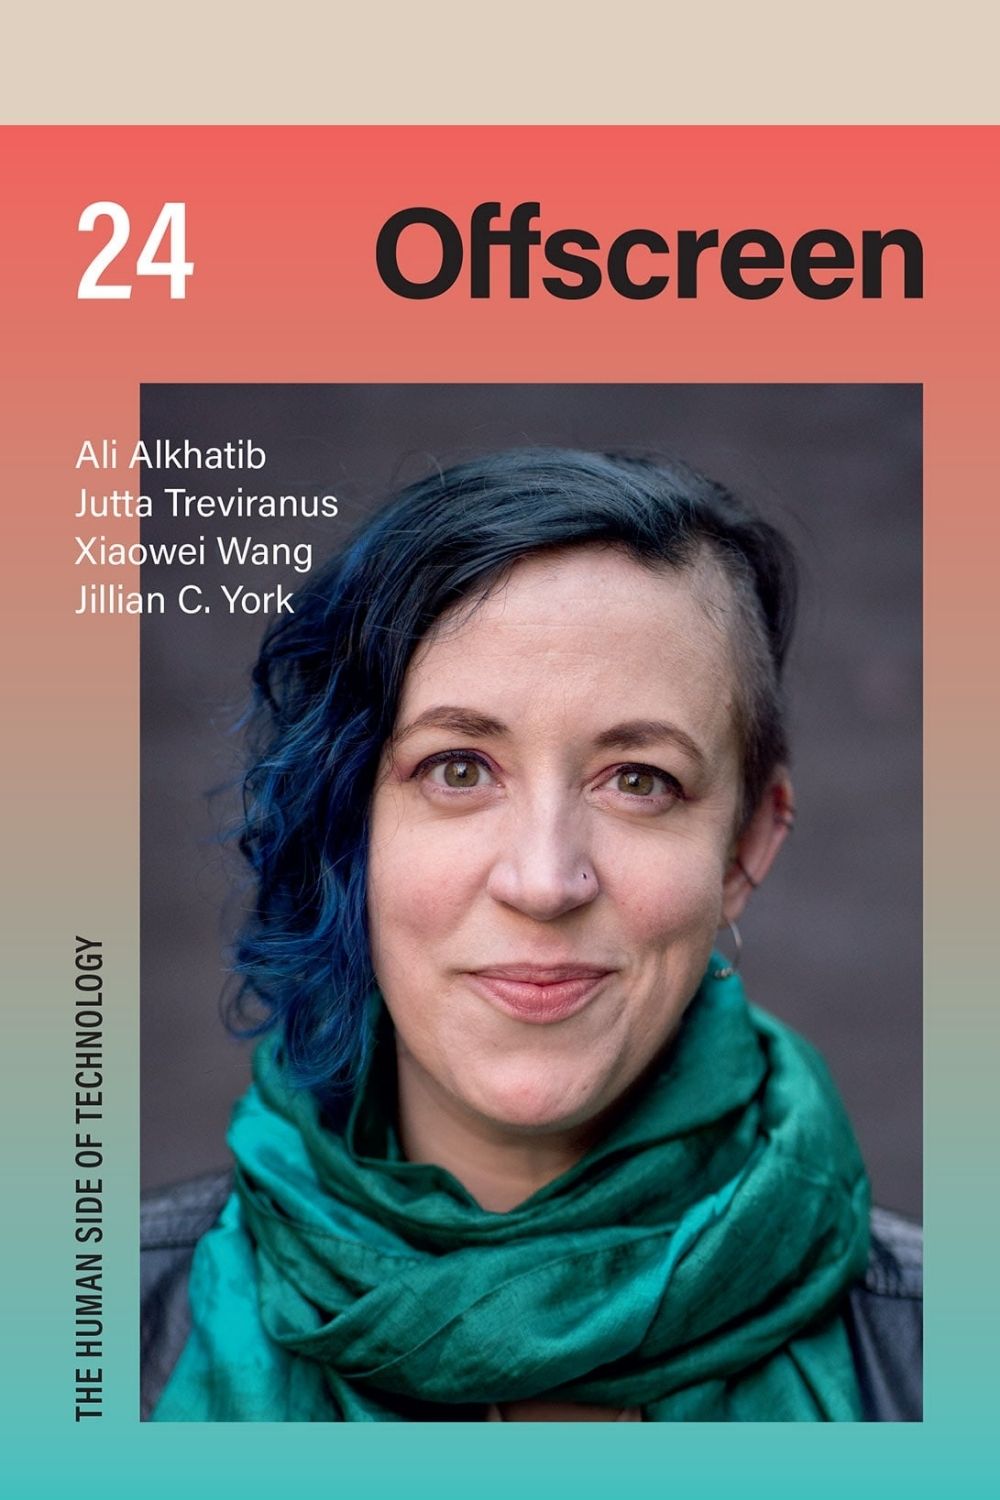 Front cover of Offscreen Magazine Issue 24